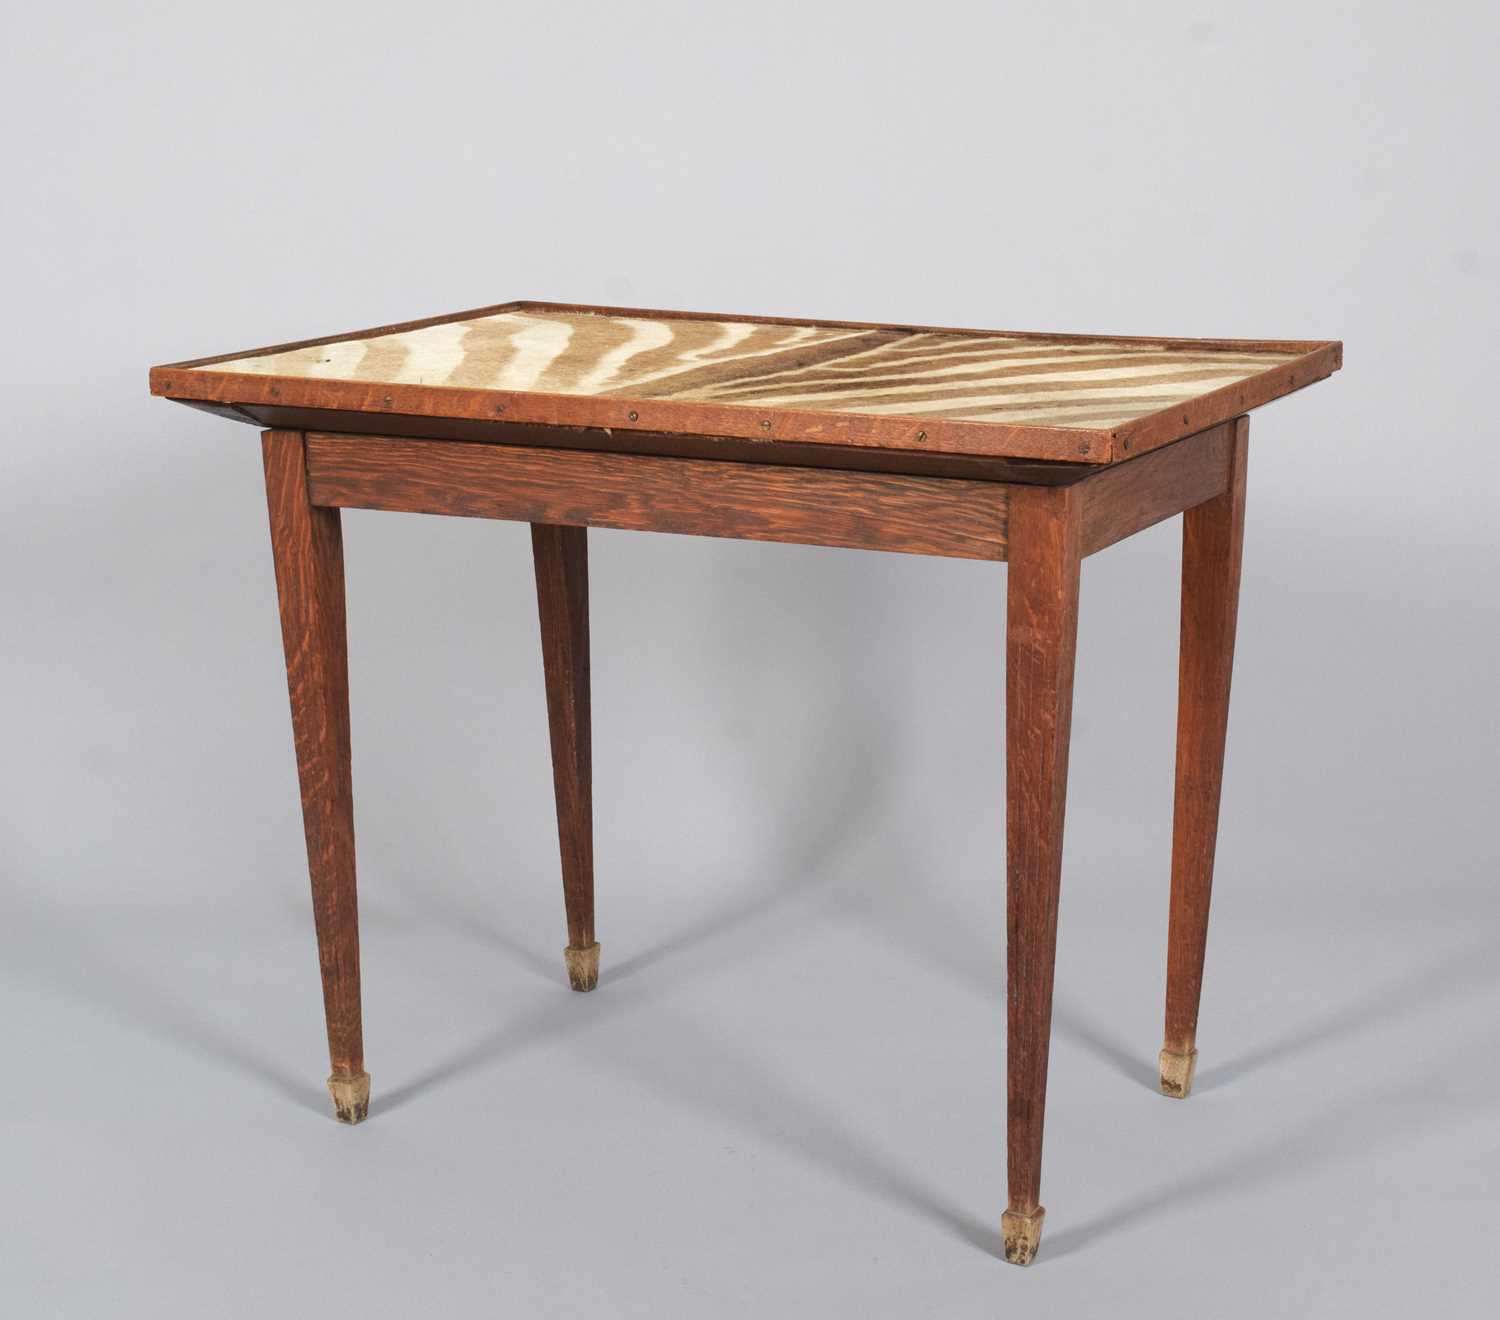 Animal Furniture: A Plains Zebra Hide Bridge Table, by Rowland Ward Ltd, 167 Piccadilly, London, the - Image 4 of 5